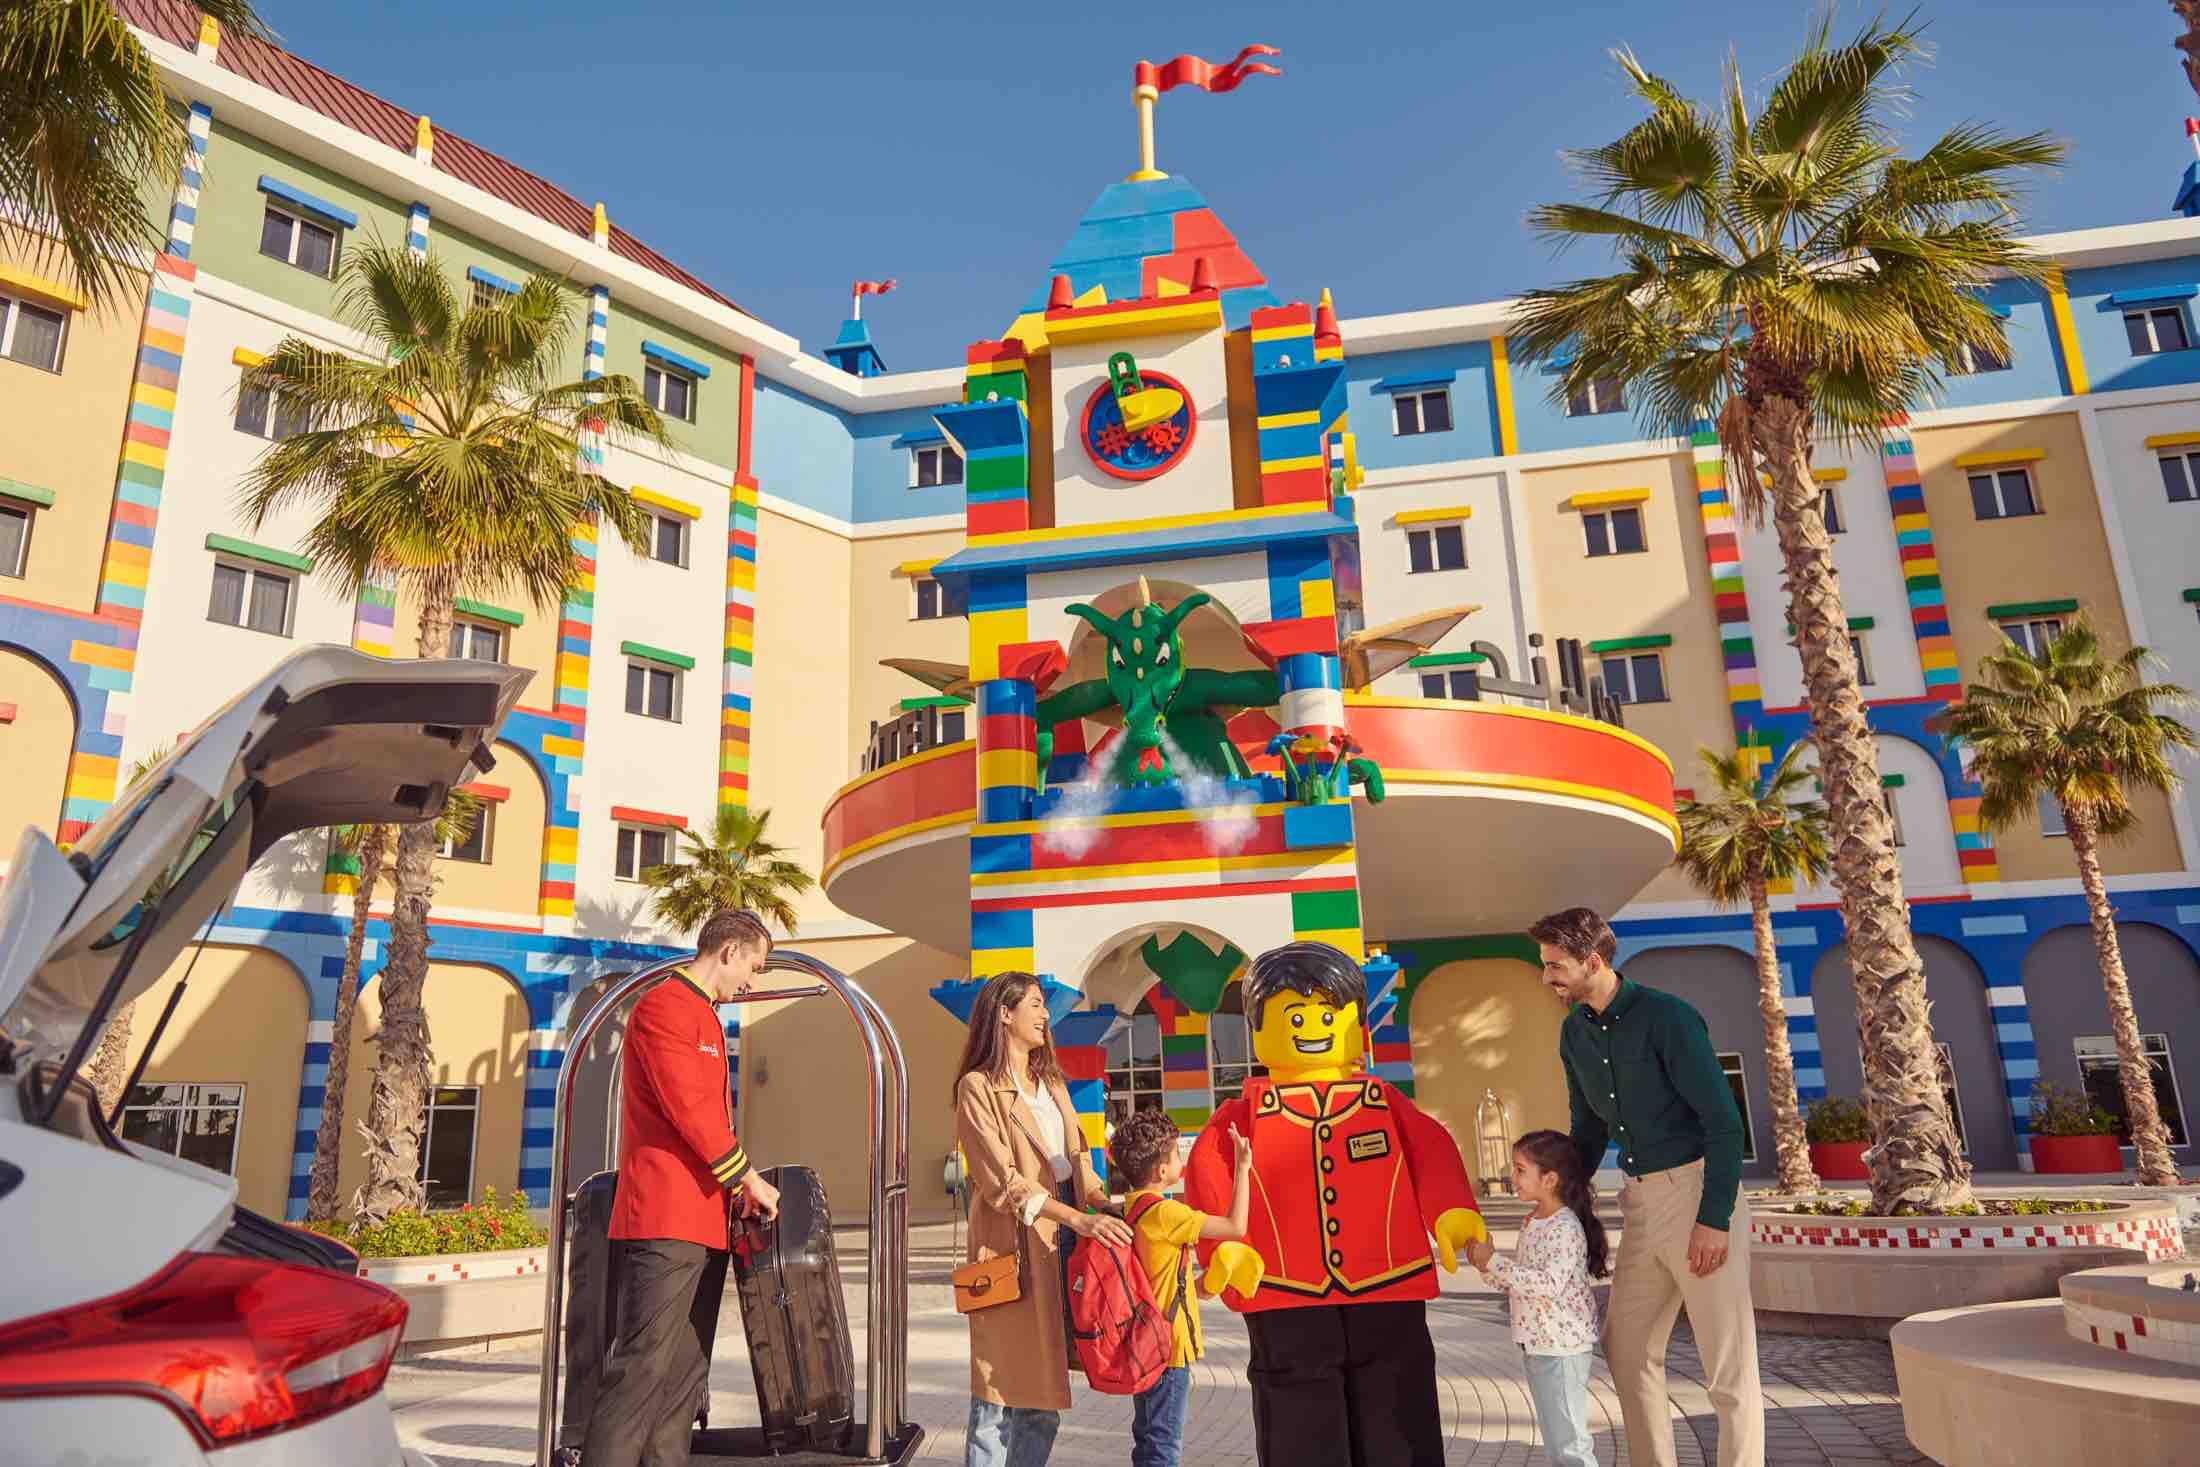 Hotel Hotspot: LEGOLAND Hotel Dubai offers a stay that stacks up